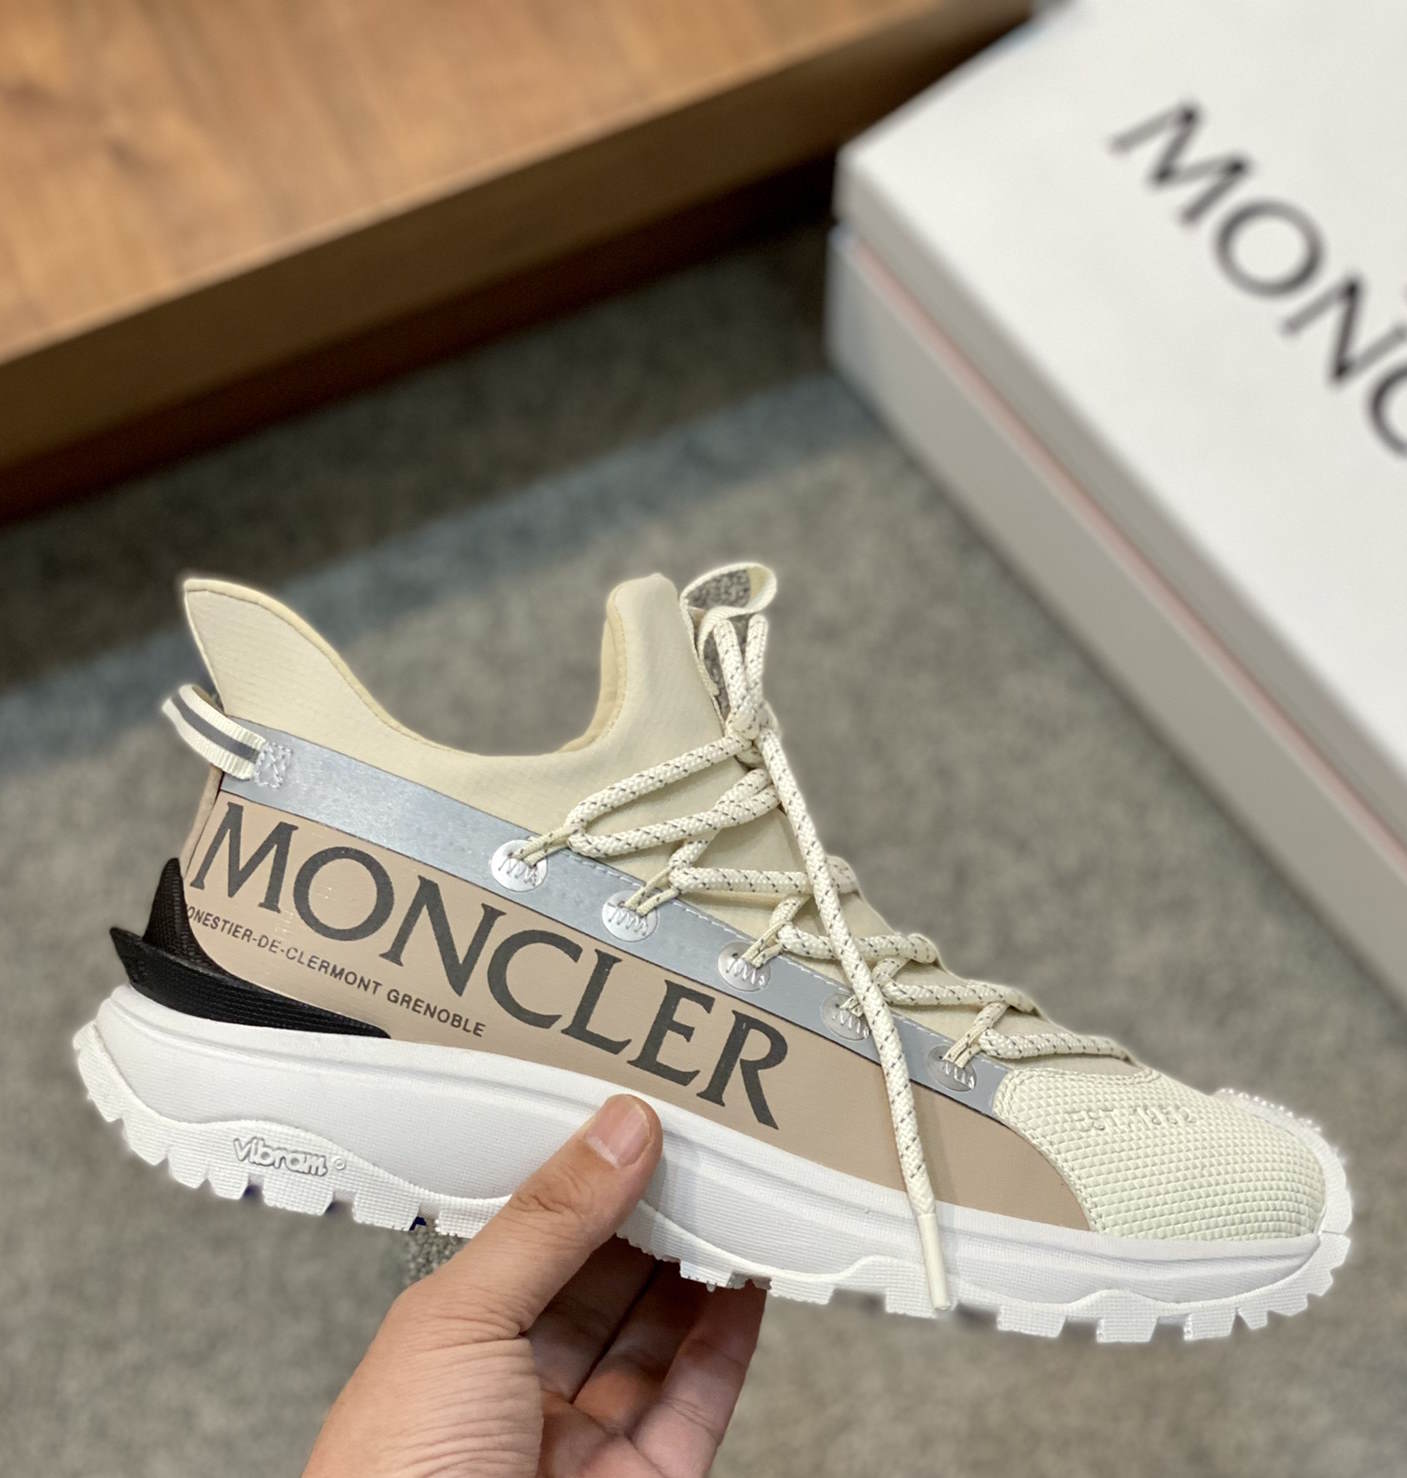 MONCR Sneakers 2 Color 's